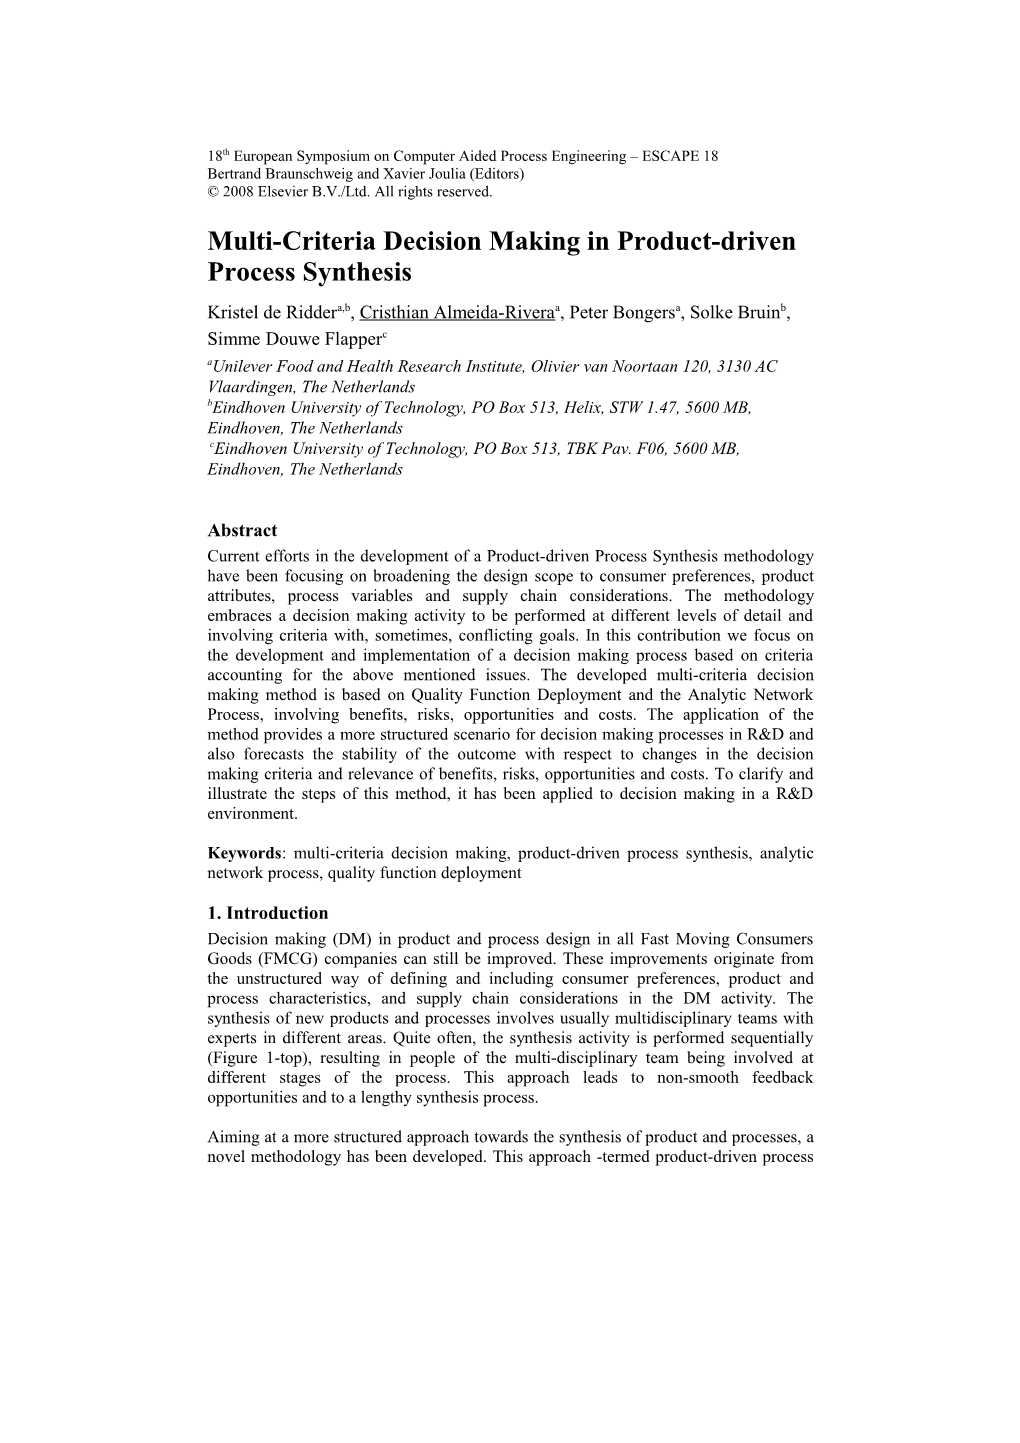 Multi-Criteria Decision Making in Product-Driven Process Synthesis